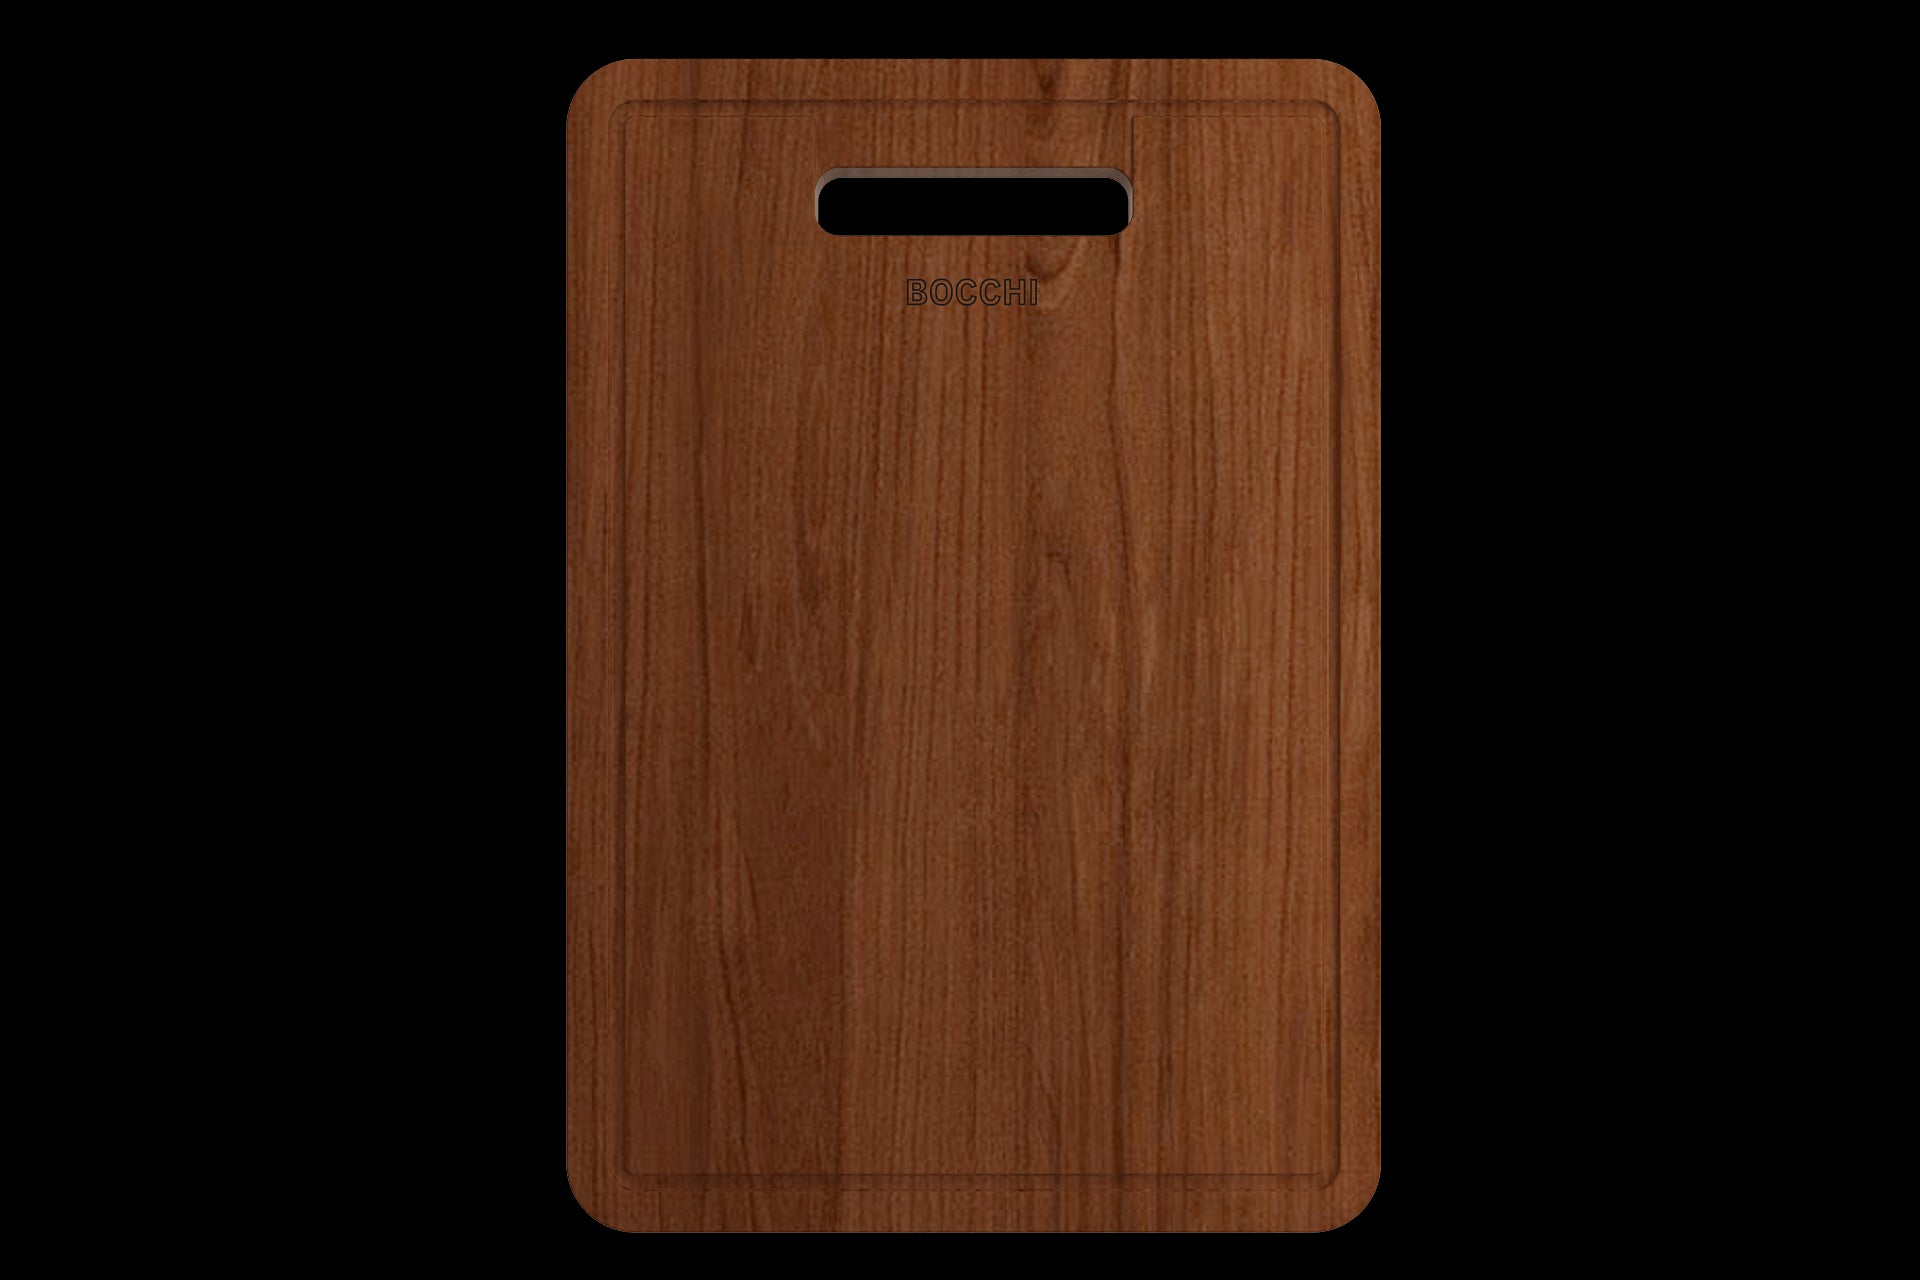 BOCCHI Wooden Cutting Board/Cover for Baveno w/ Handle - Sapele Mahogany for 1633 sinks (Outer Ledge)